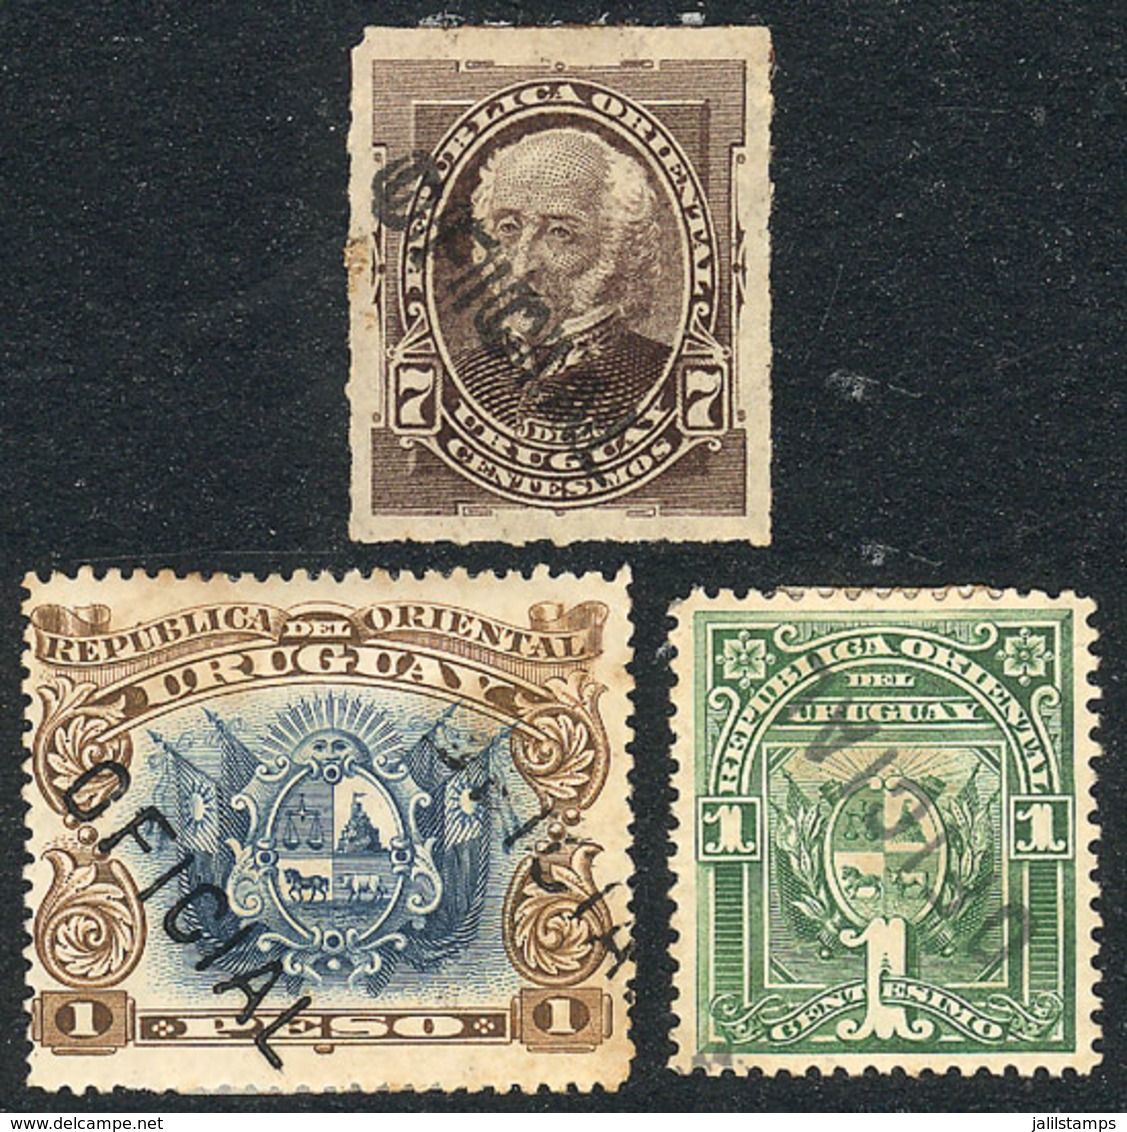 URUGUAY: 3 Old Stamps With VARIETIES: 2 With Double Overprint, And The Other With Inverted Ovpt, VF Quality! - Uruguay